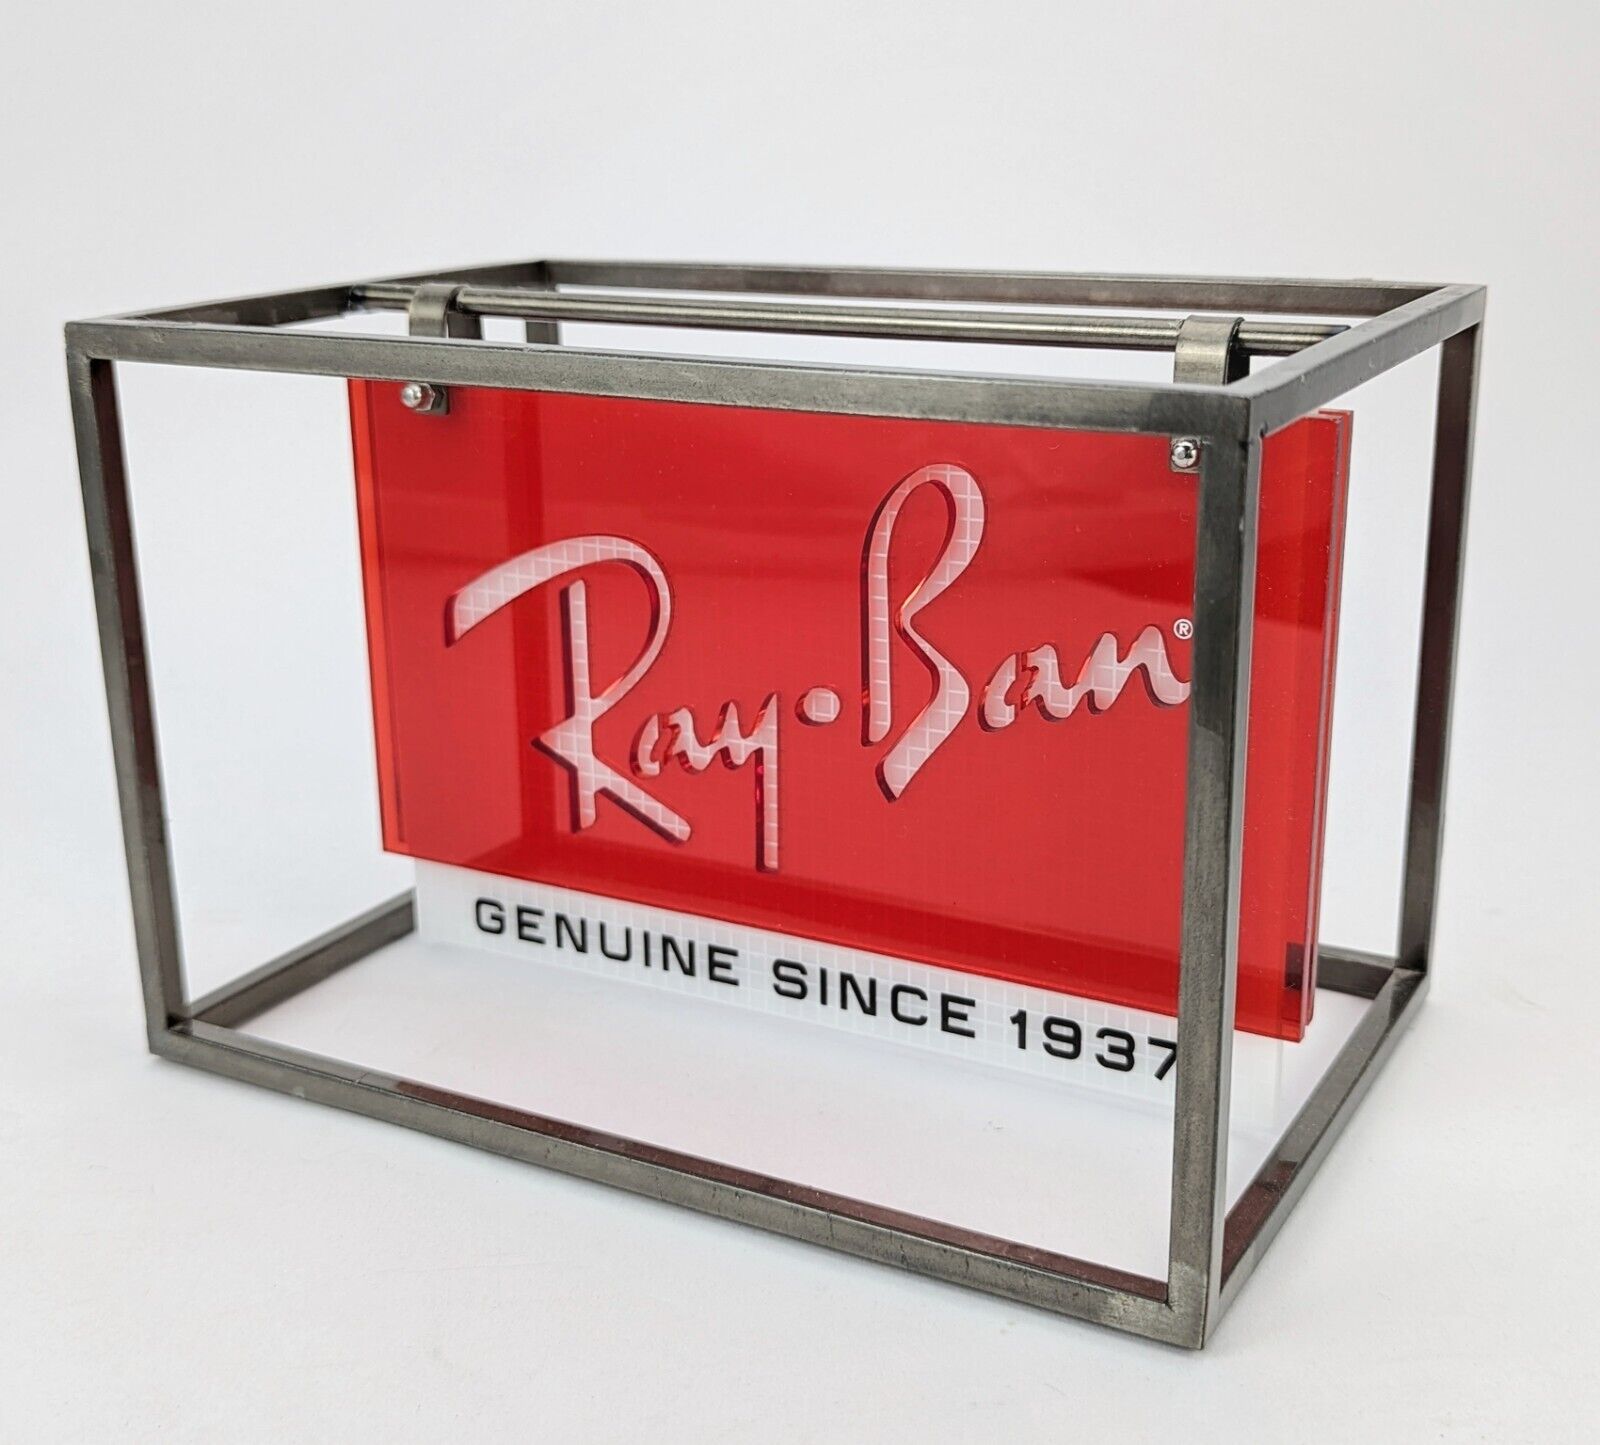 RAY-BAN genuine since 1937 Double Sided Metal/Plexi Counter Display Sign 